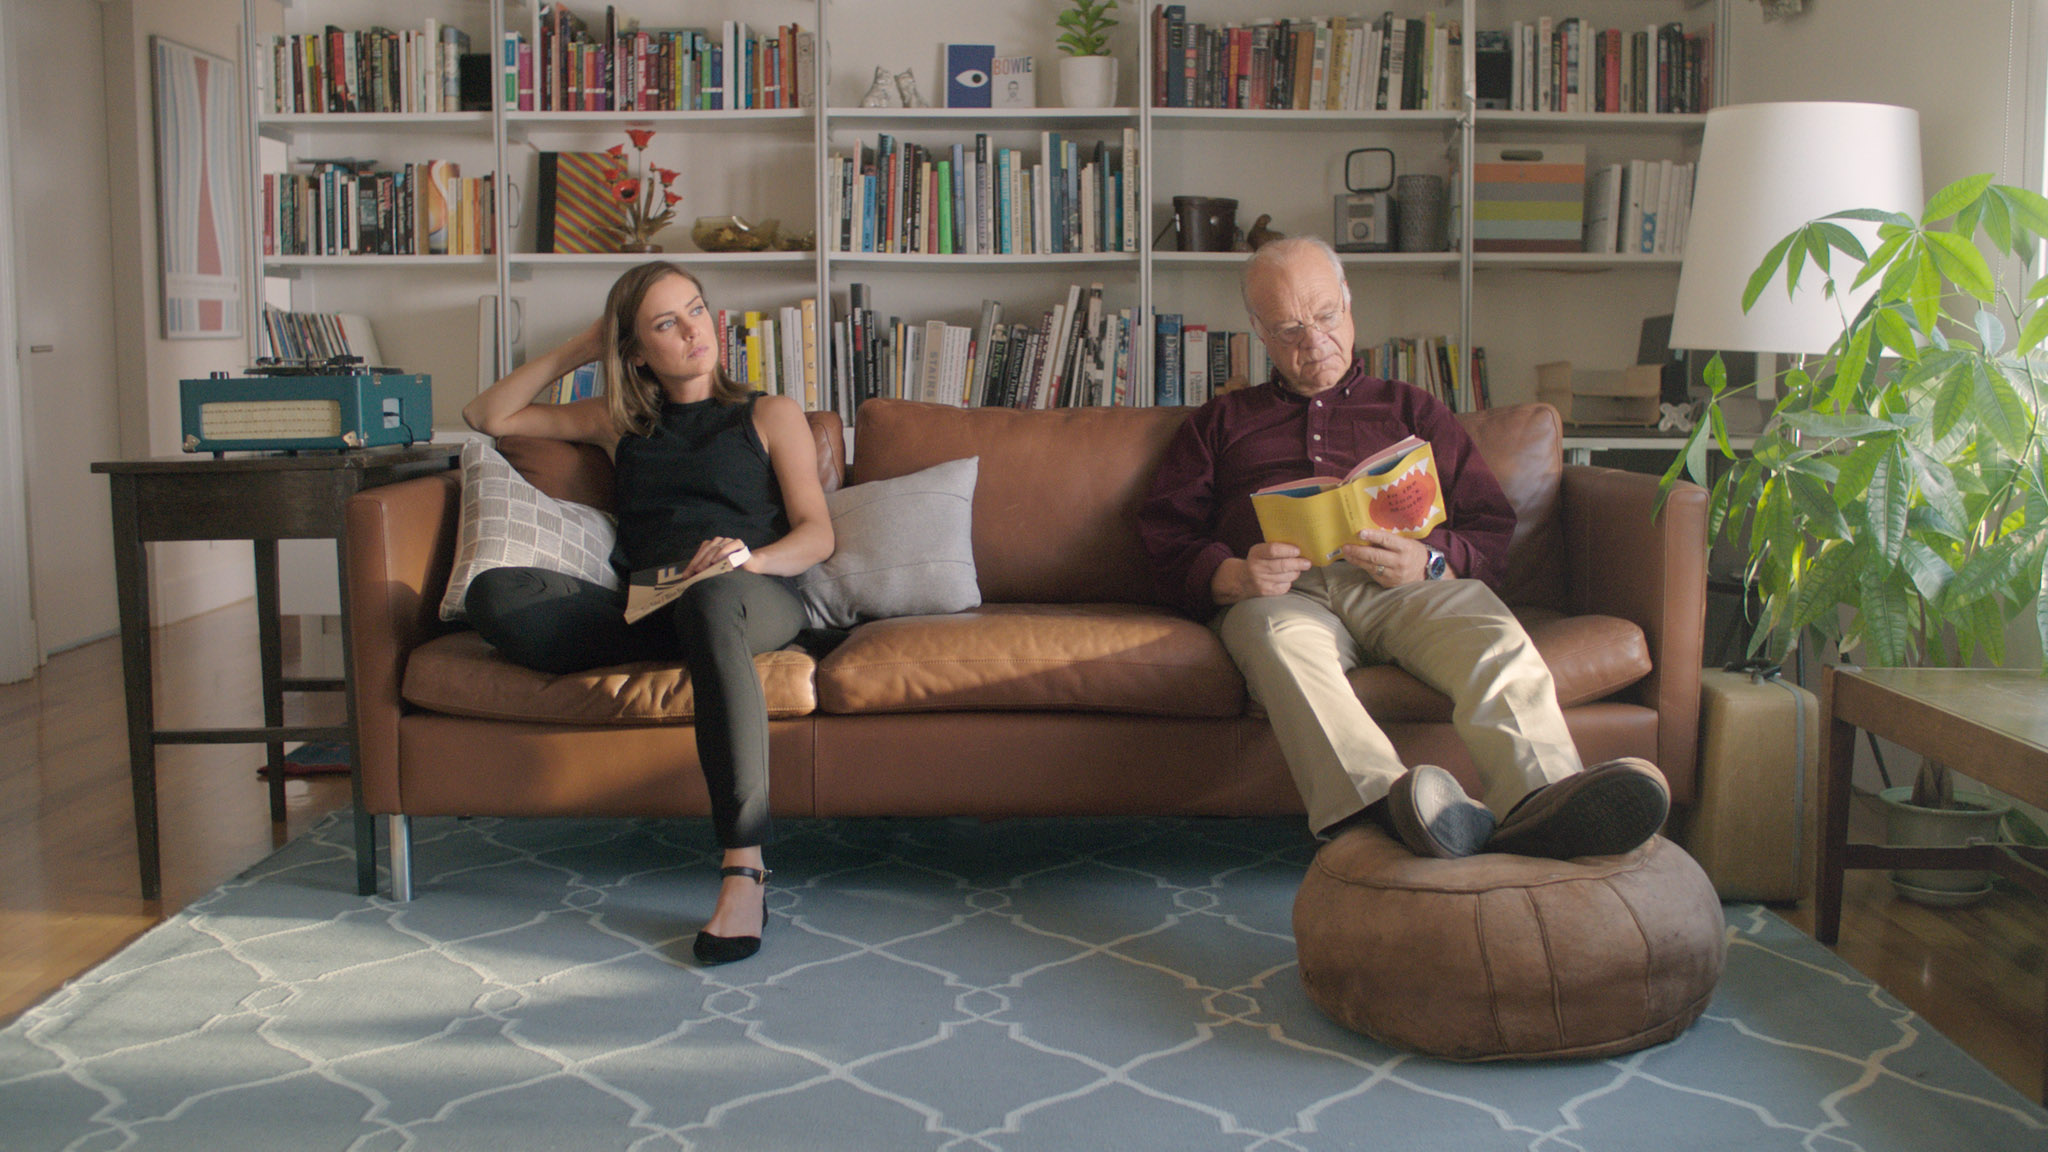 Alice & Joel on the couch. Youth, a short film coming in 2016. Starring Jessica Stroup and George Maguire, directed by Brett Marty. A sci-fi film about growing old in a world of perpetual youth.